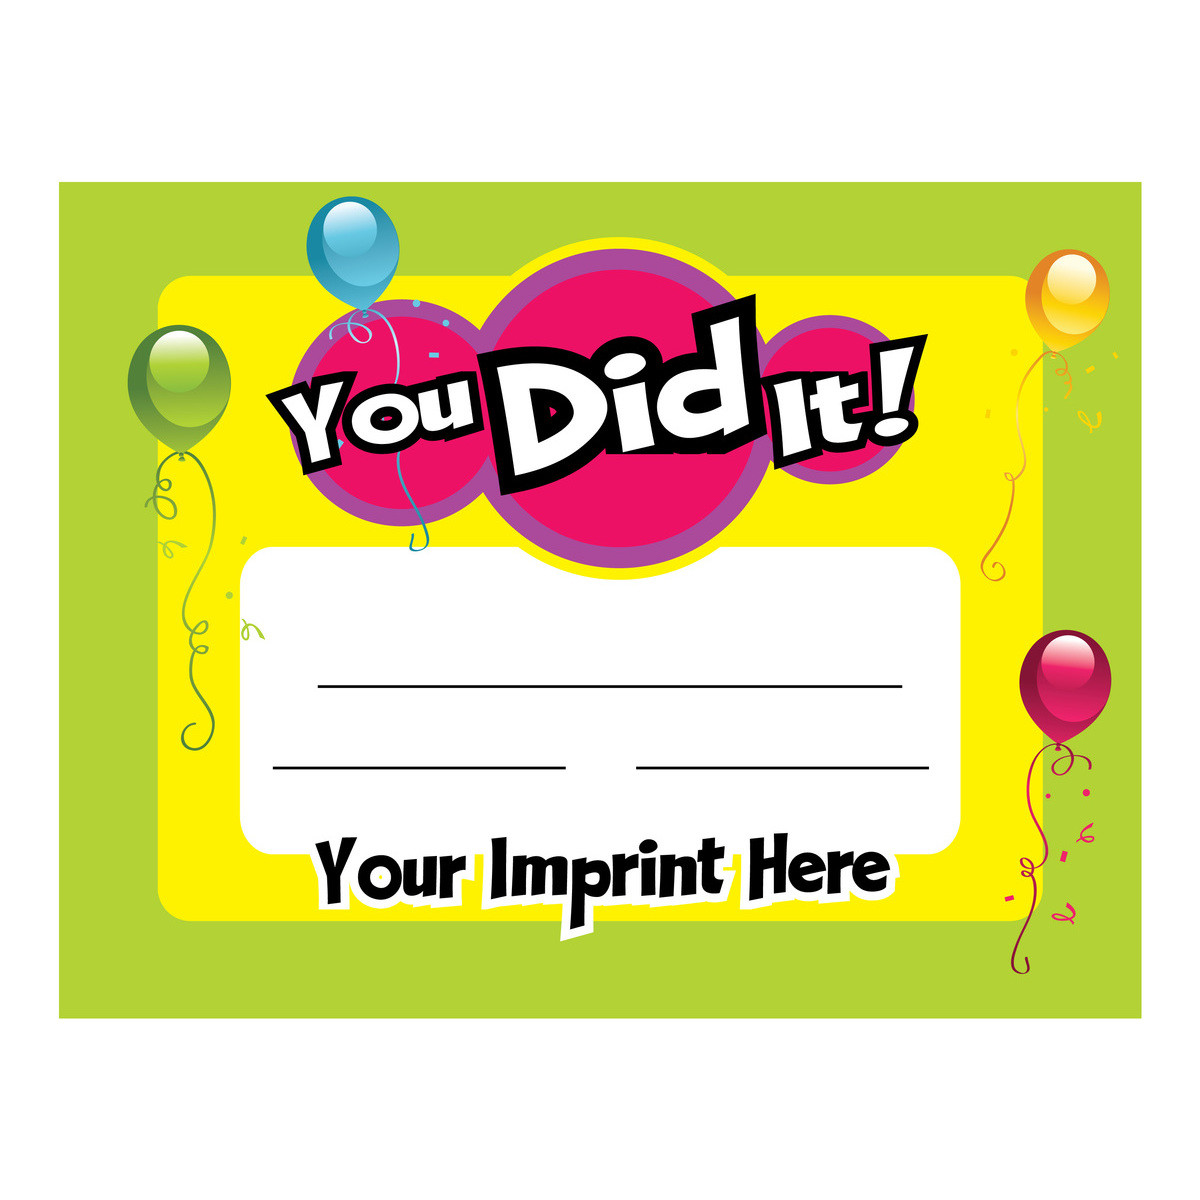 Custom 8.5" x 11" Certificate You Did It Certificates School Products